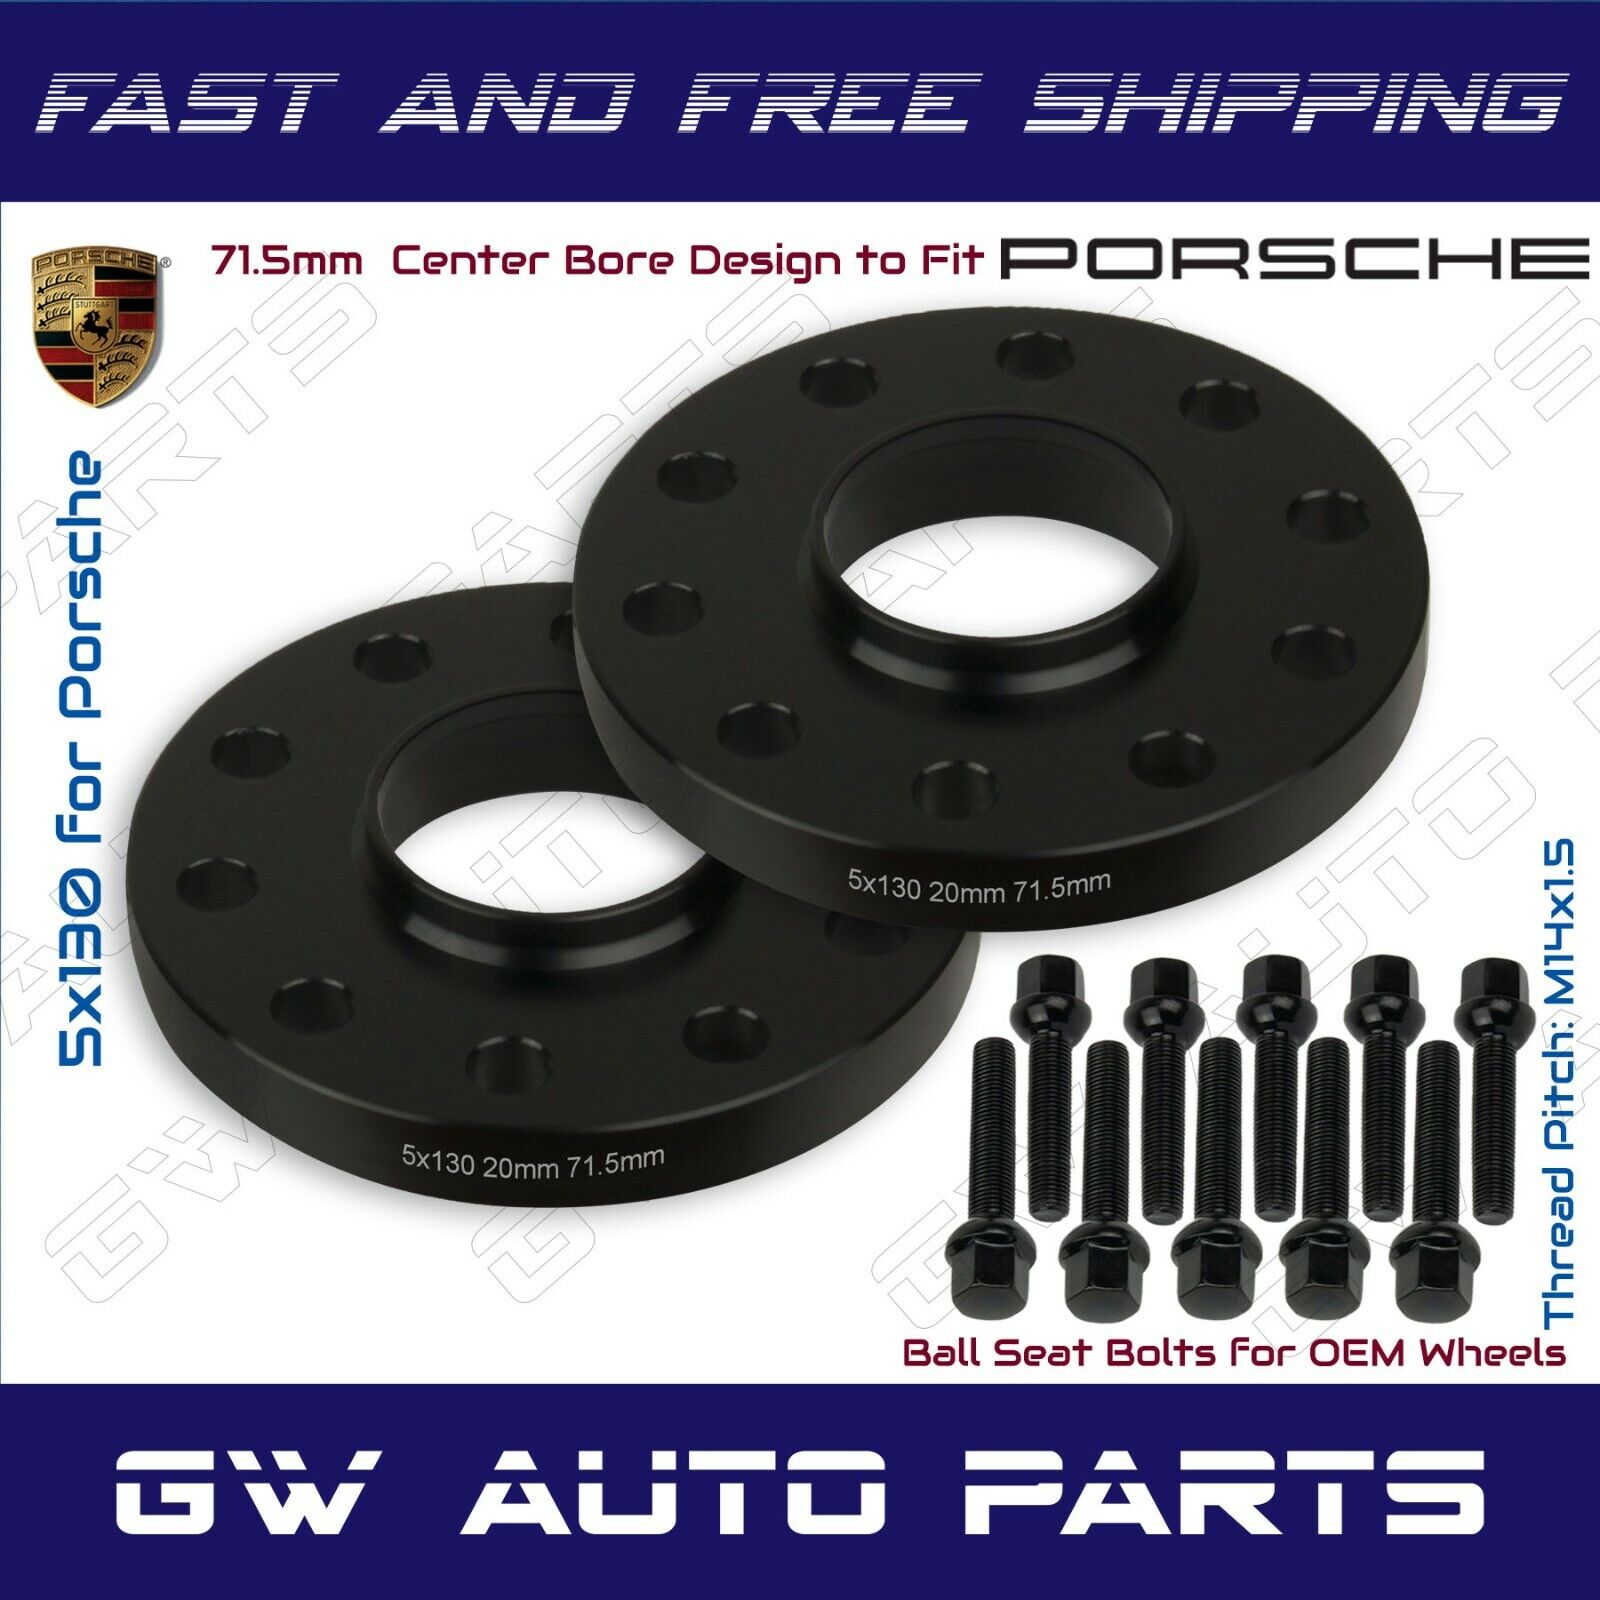 2PC 5x130 20mm Hub Centric Wheel Spacers For Porsche 911 Comes With Lug Bolts